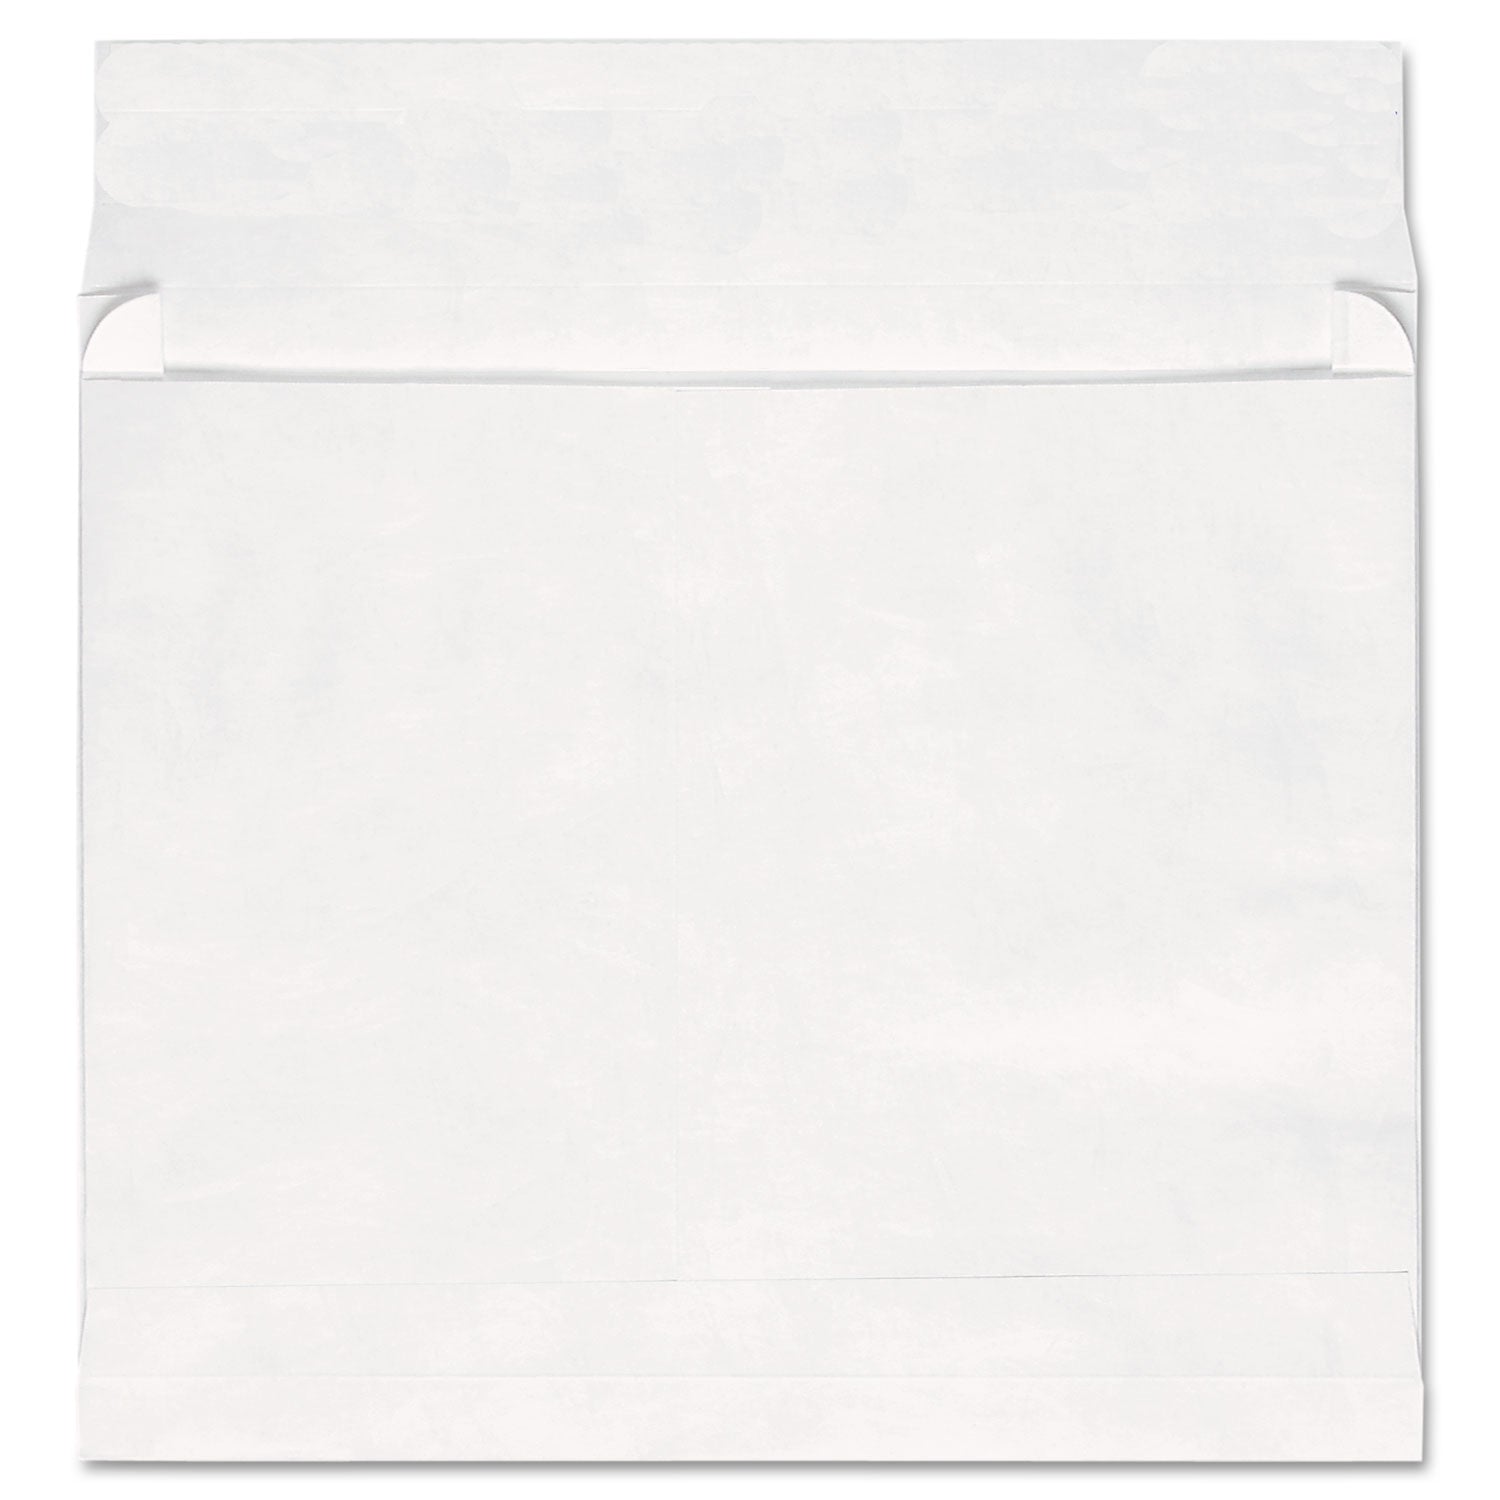 Deluxe Tyvek Expansion Envelopes, Open-End, 2" Capacity, #13 1/2, Square Flap, Self-Adhesive Closure, 10 x 13, White, 100/Box - 